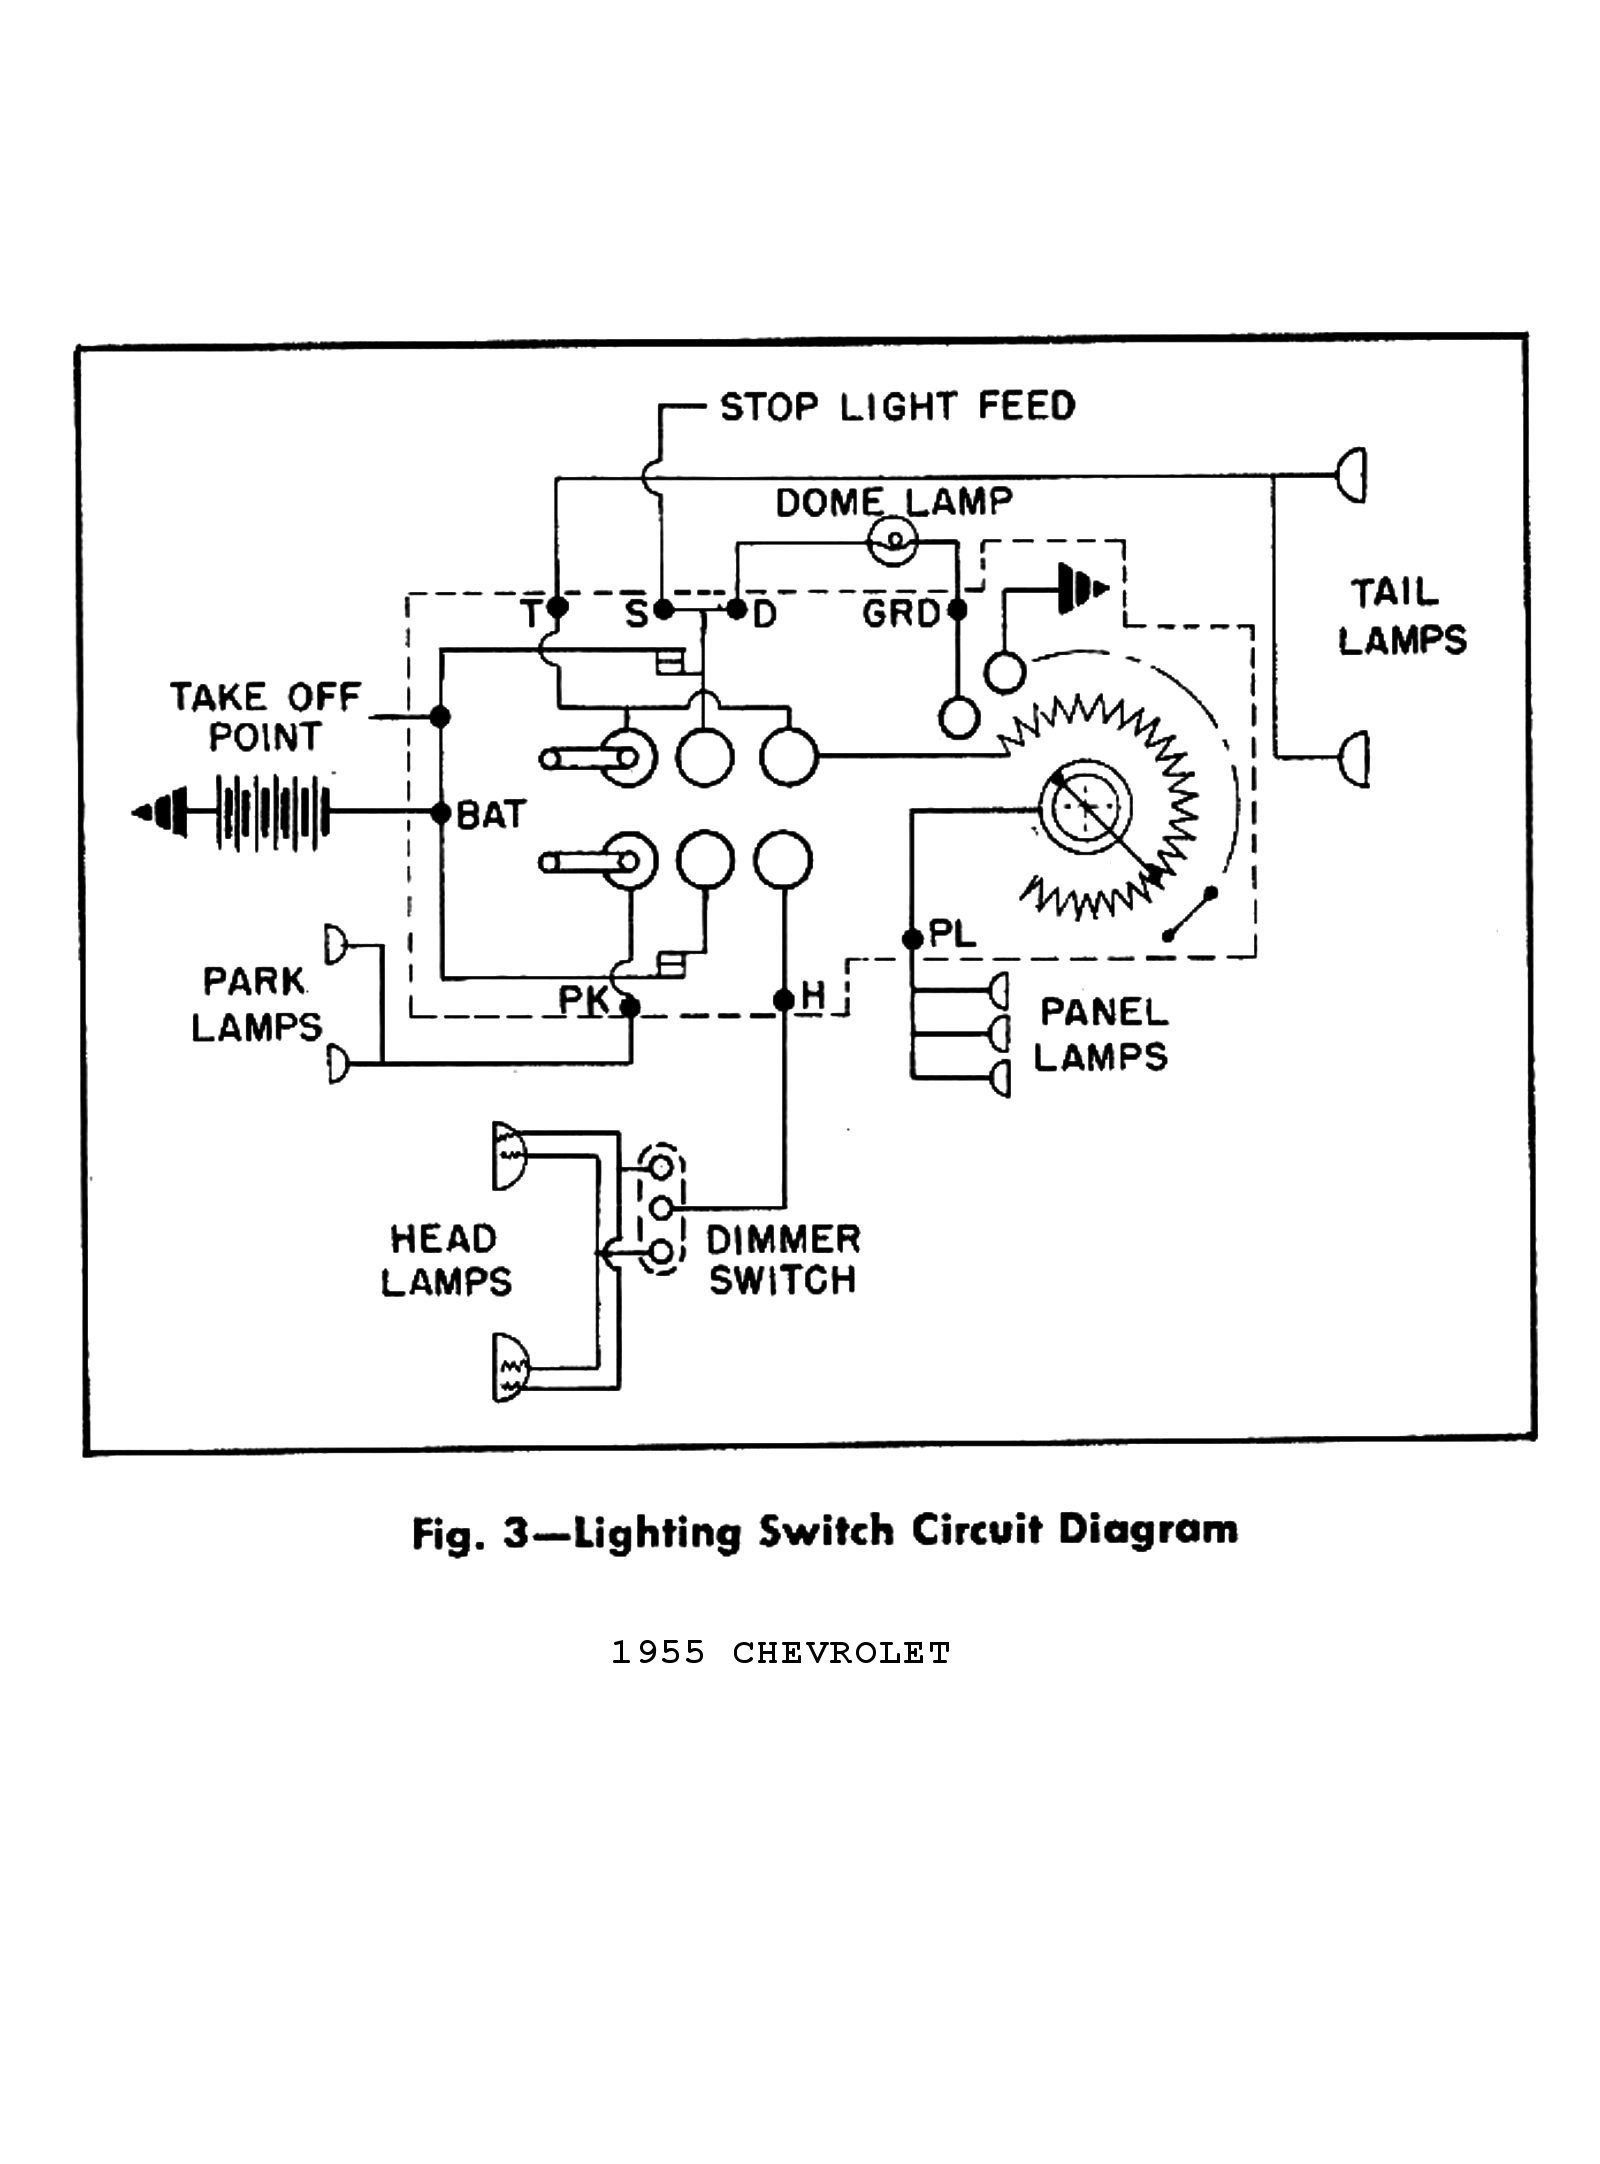 Chevrolet Ignition Switch Wiring Diagram | Wiring Diagram - Gm Ignition Switch Wiring Diagram